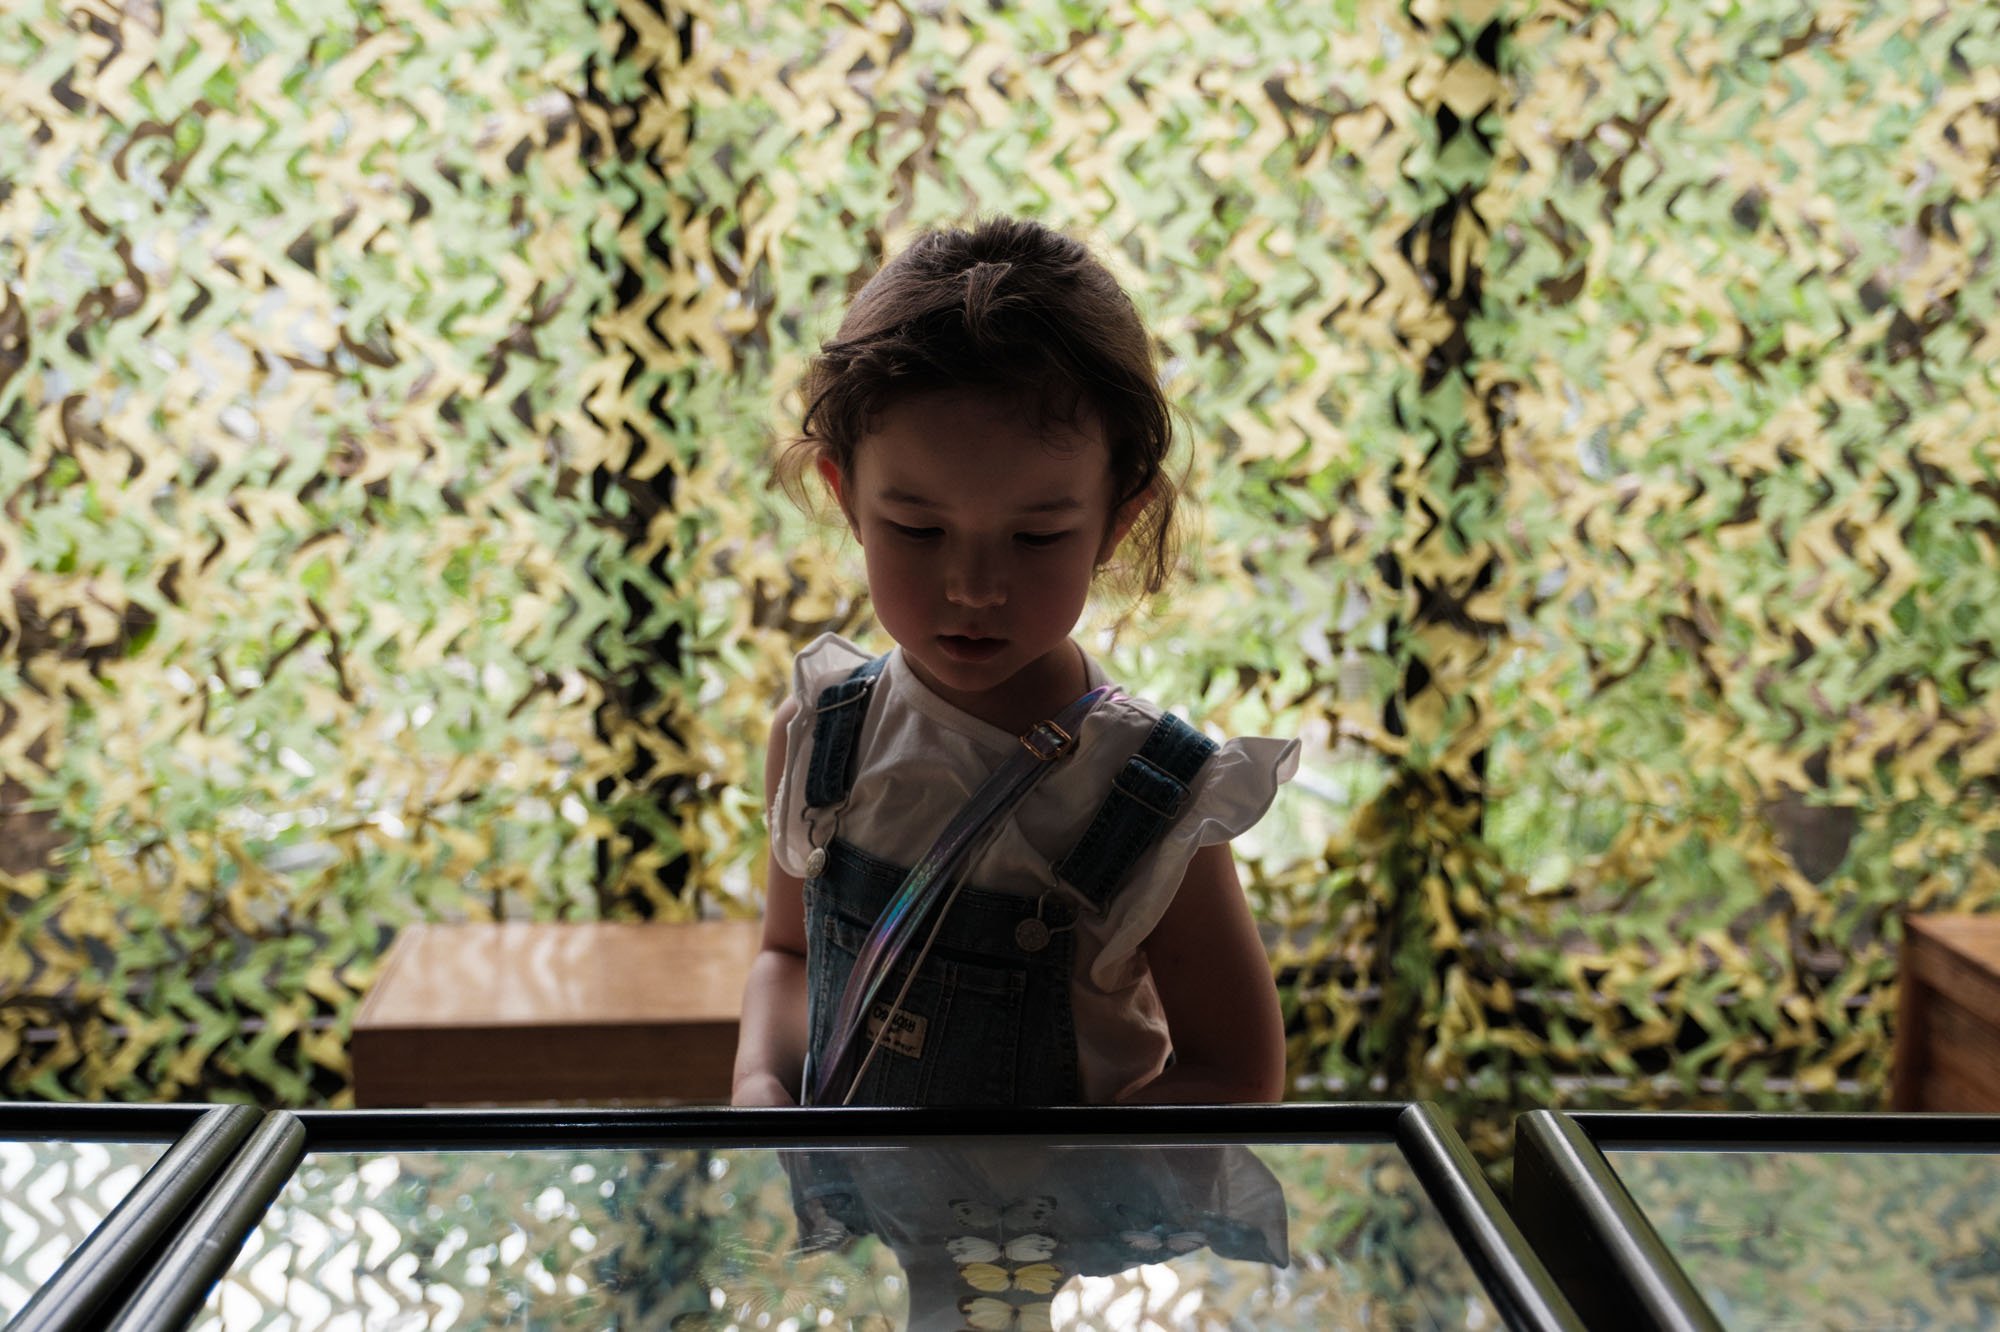 A little girl looks at pinned butterflies in a case at the Taipei Zoo in Taiwan.